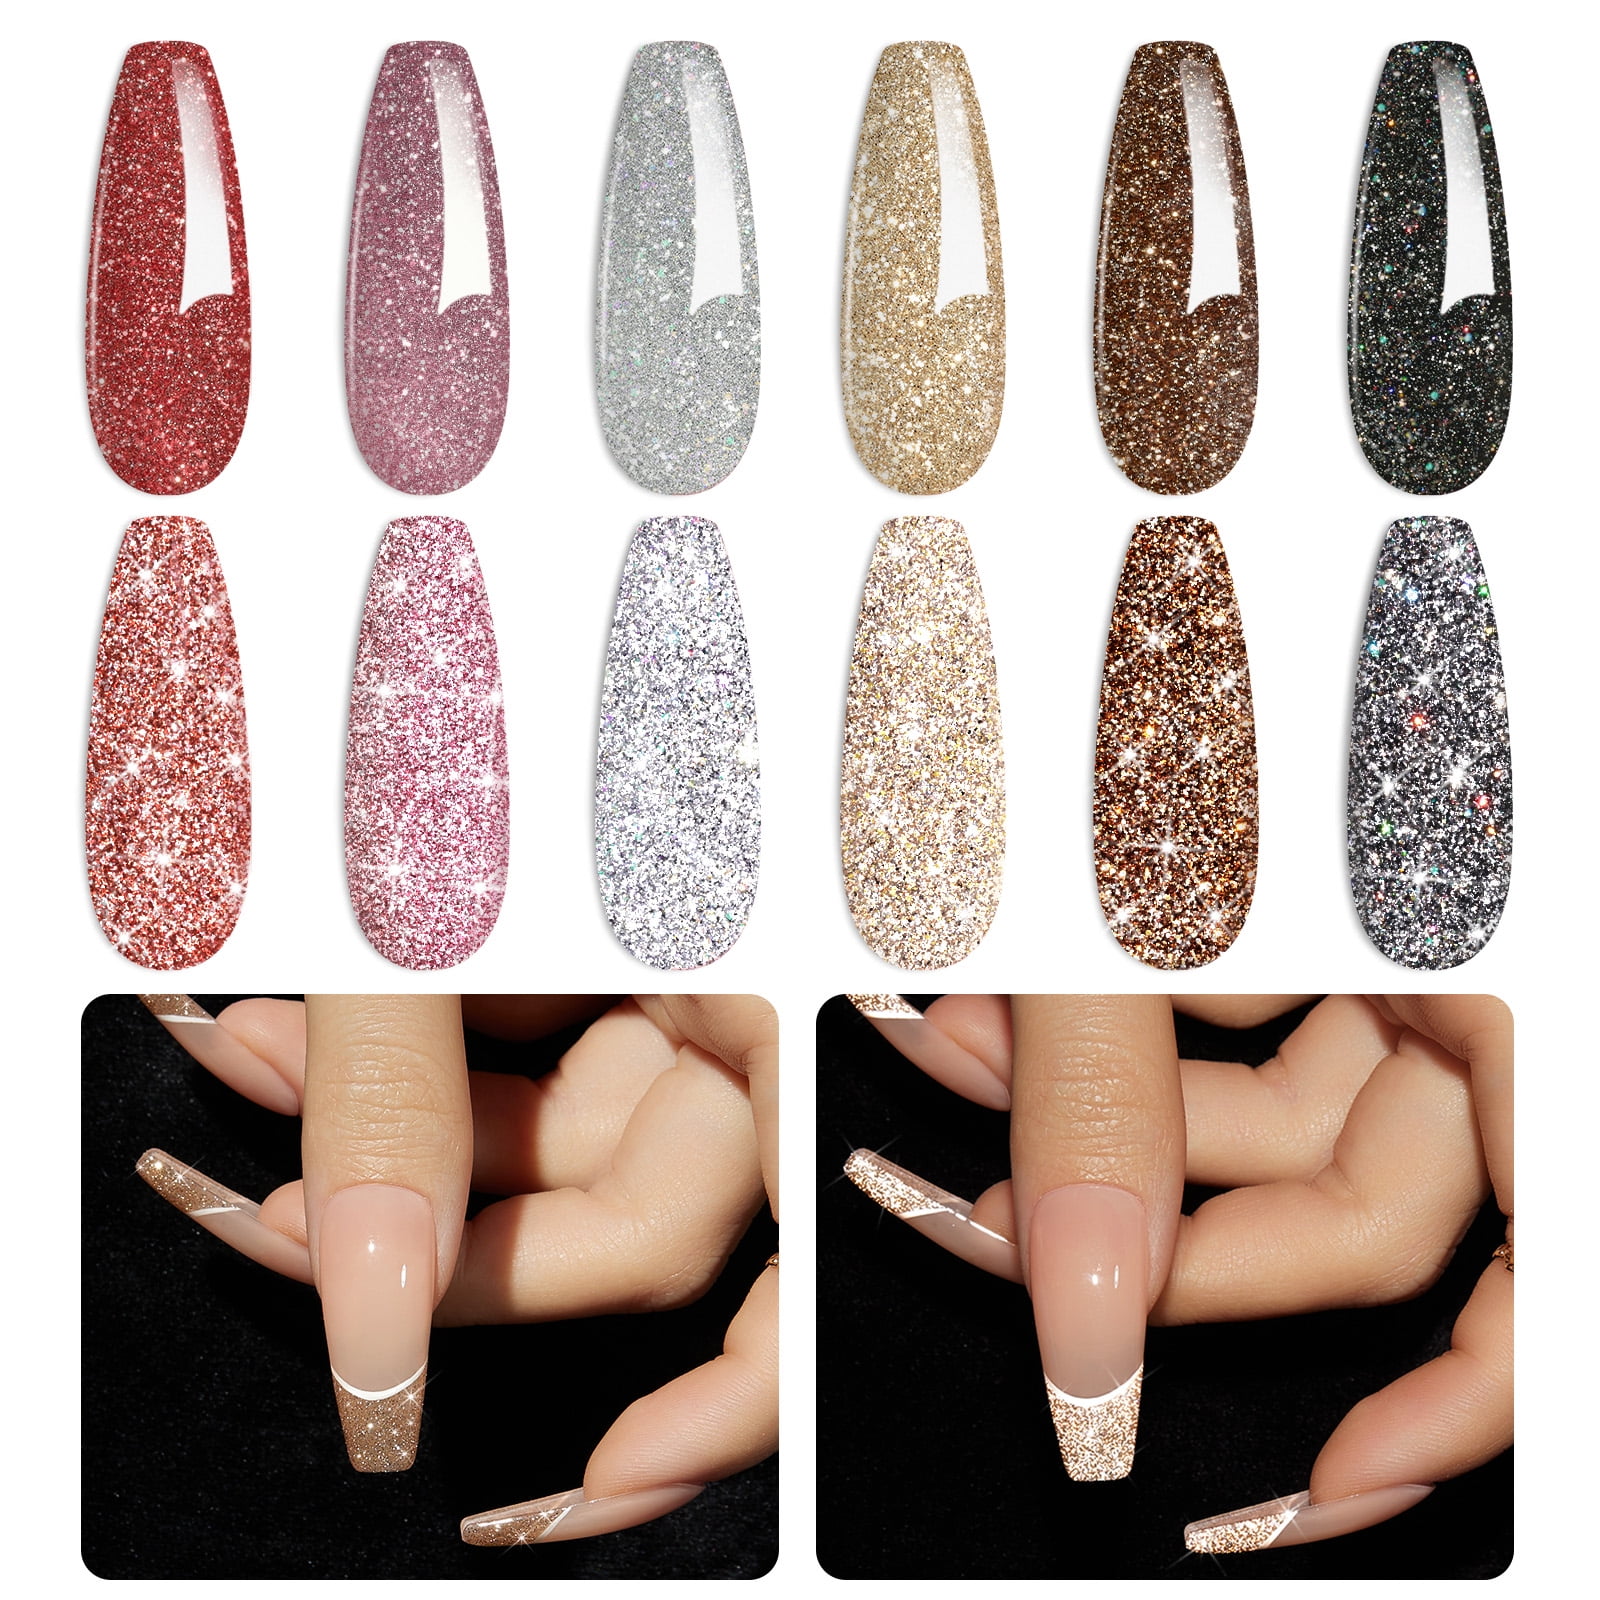 Forever 21- Love & Beauty 7 Piece Glitter Nail Polish Set | Alilacquer